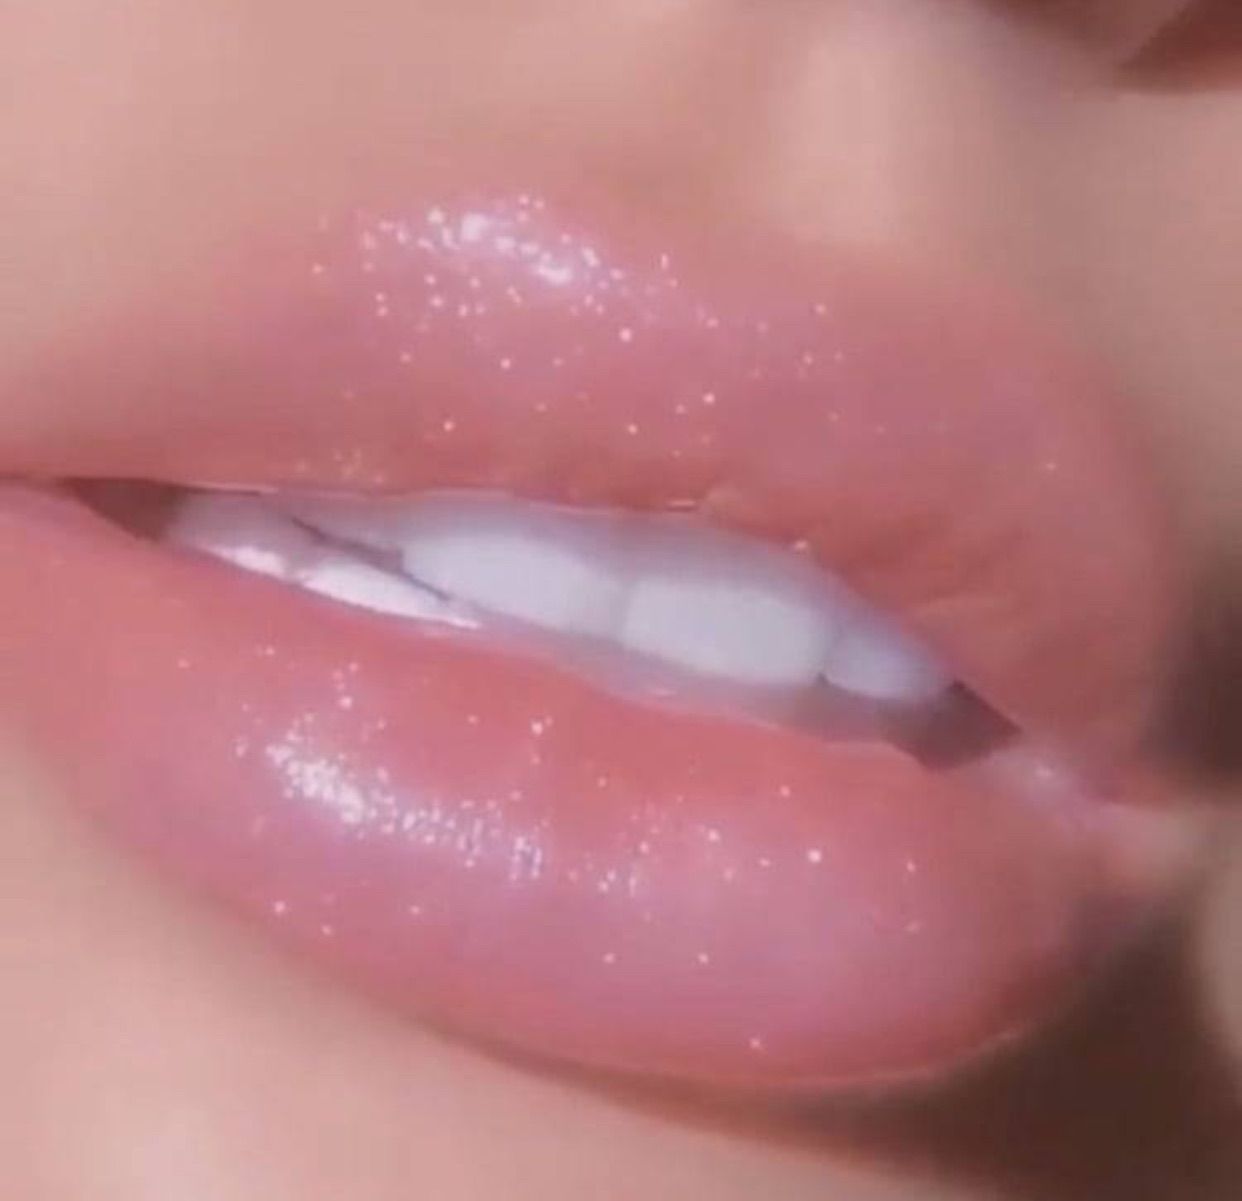 image about lips. See more about lips, makeup